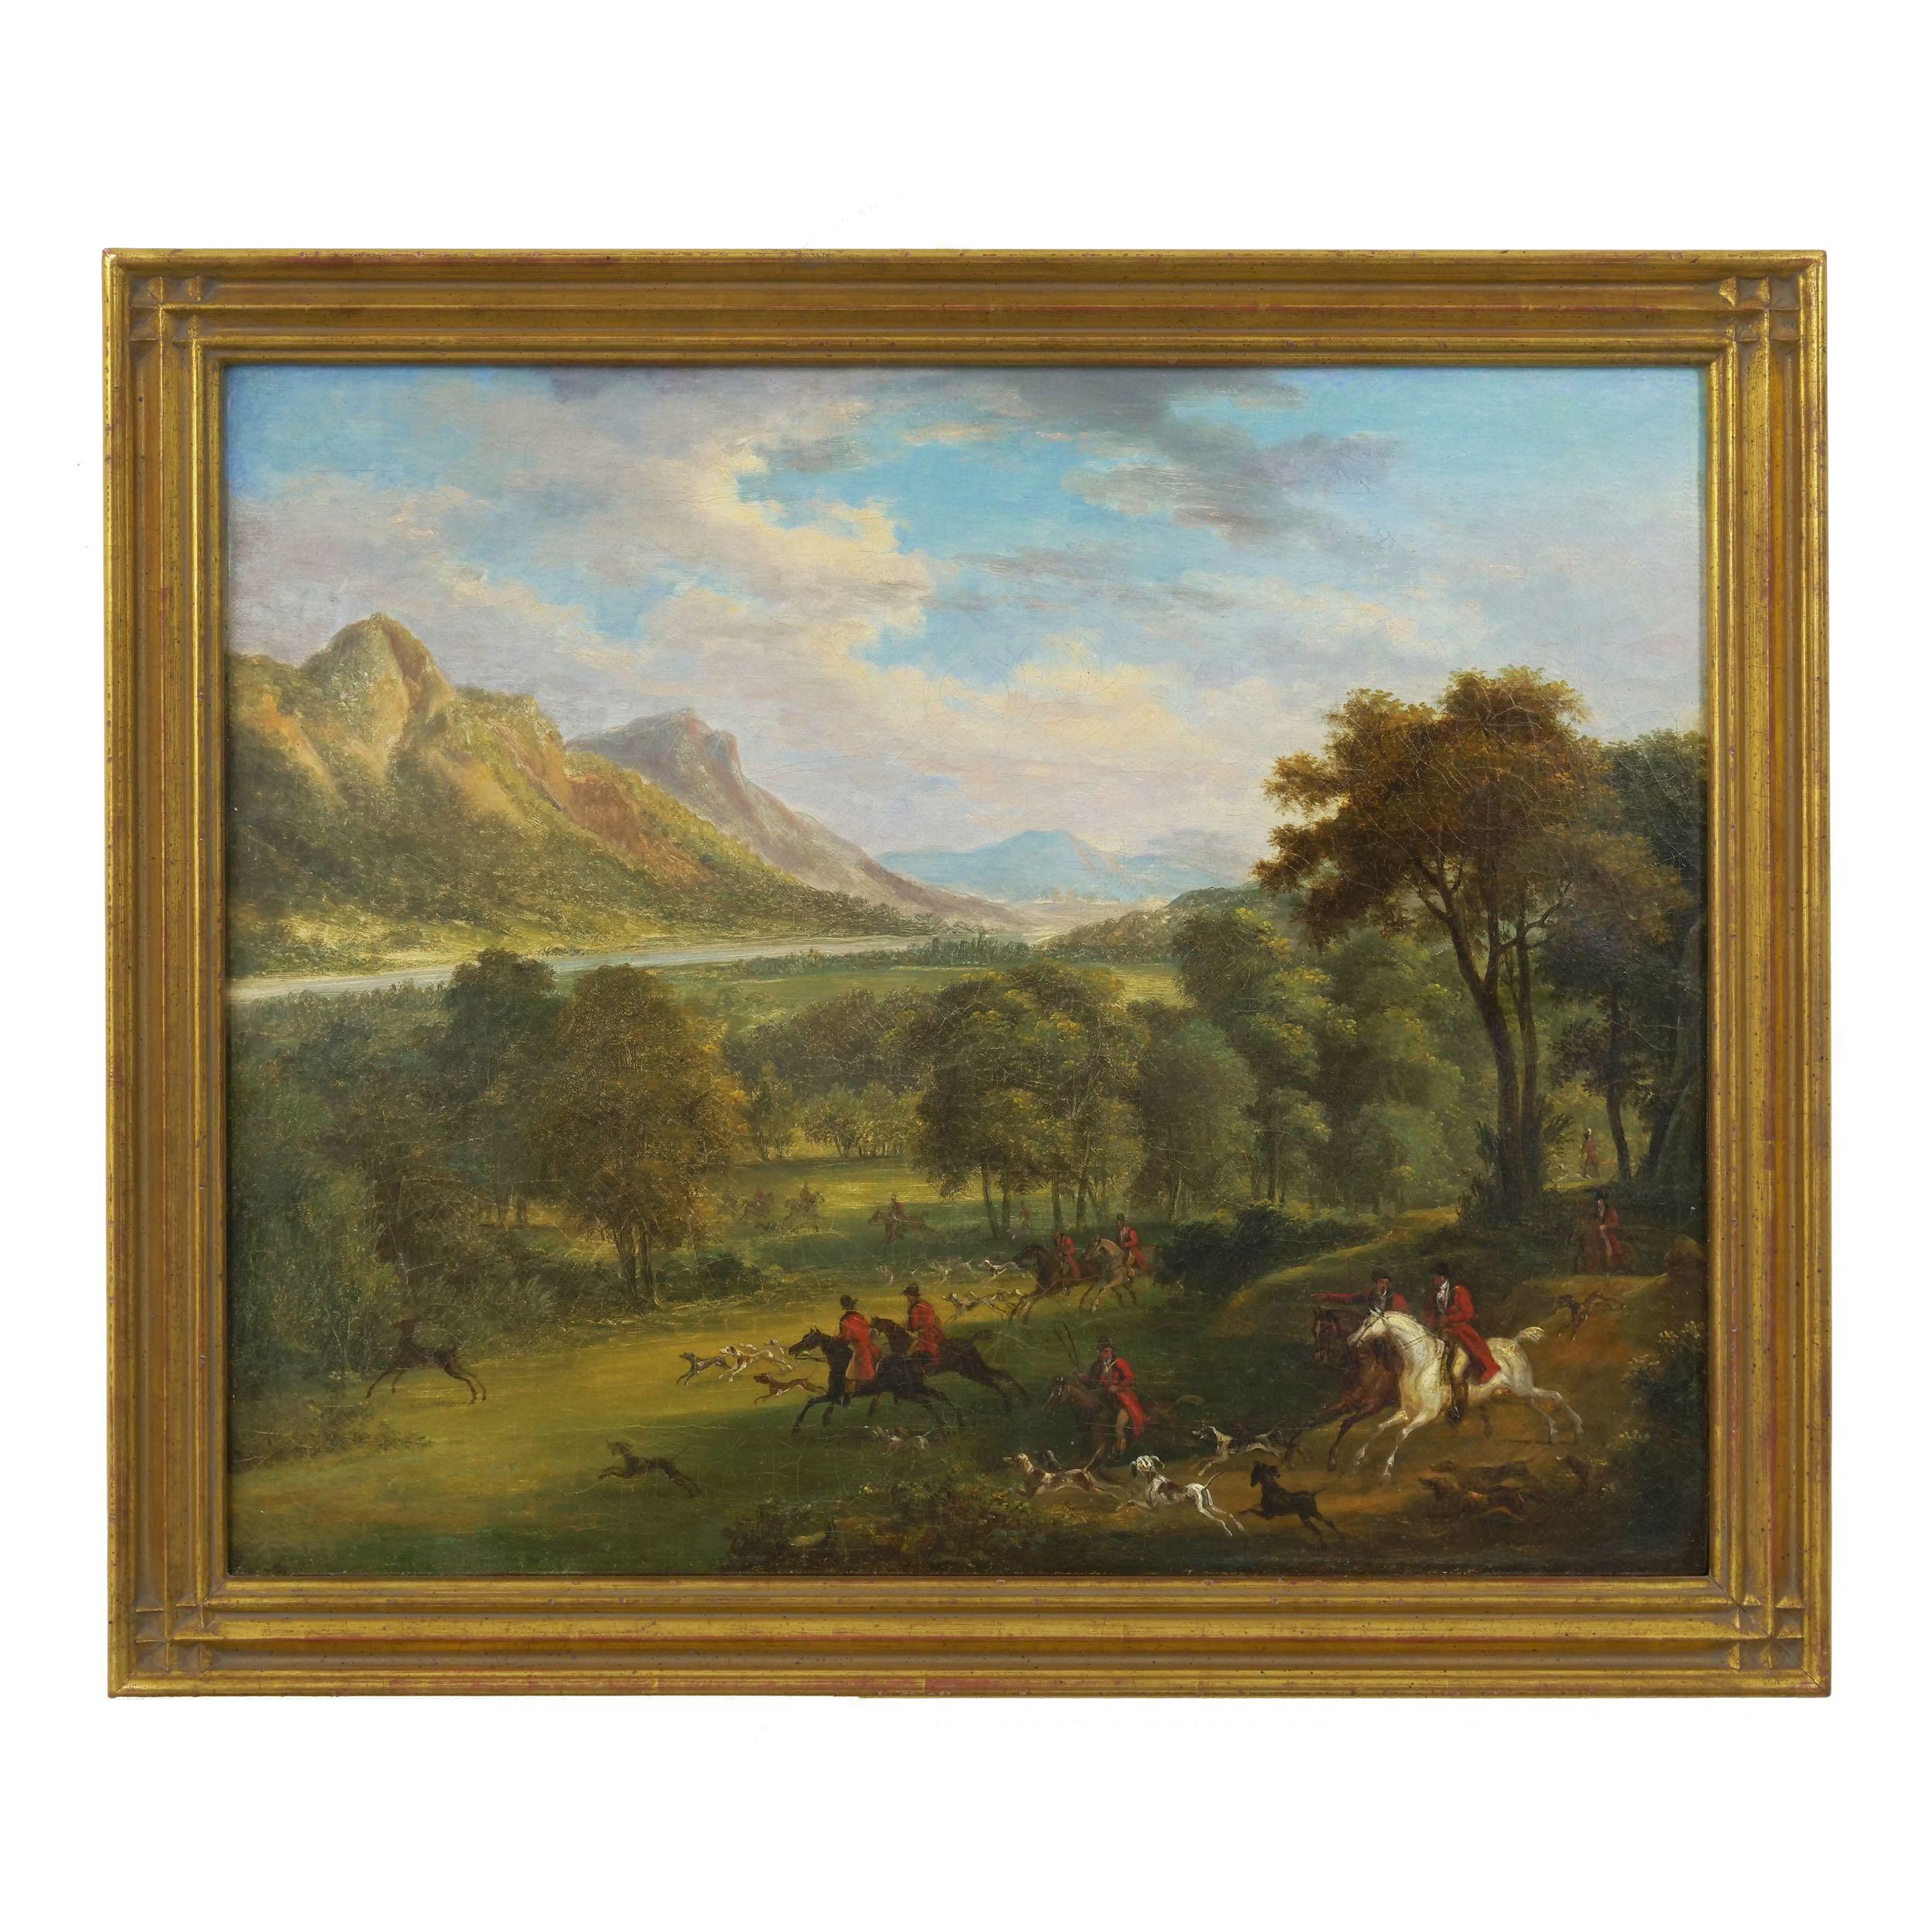 A fine sweeping landscape for being a relatively small work the detail throughout is simply outstanding. The painting depicts a large hunting party of riders and their mounts following the lead of their hounds as they follow a stag into the wooded